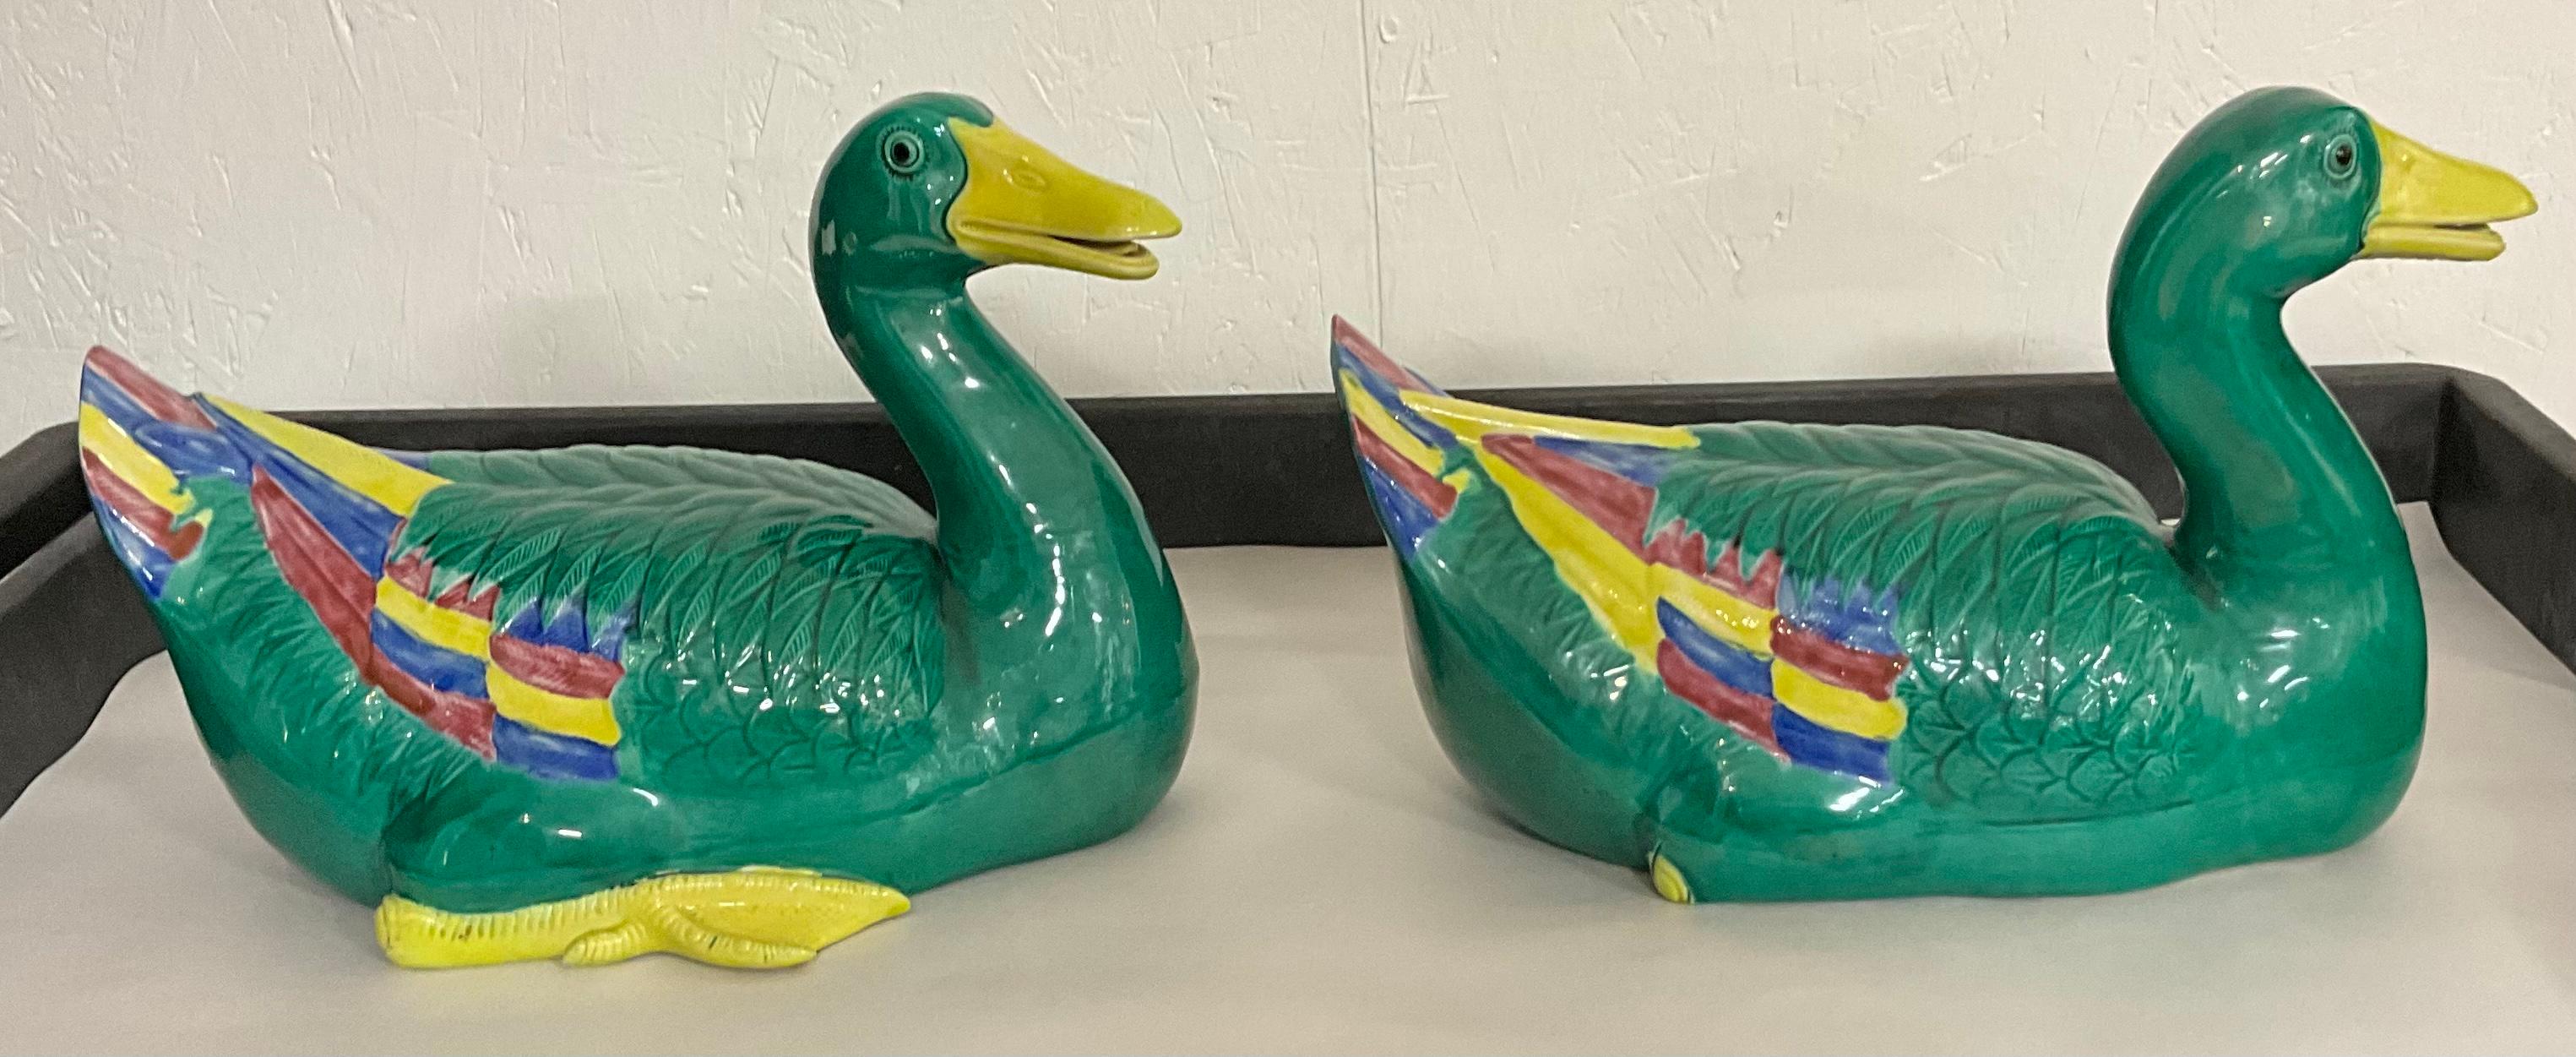 This is a pair of large scale Chinese Export ducks in very good condition. They have vivid colors!